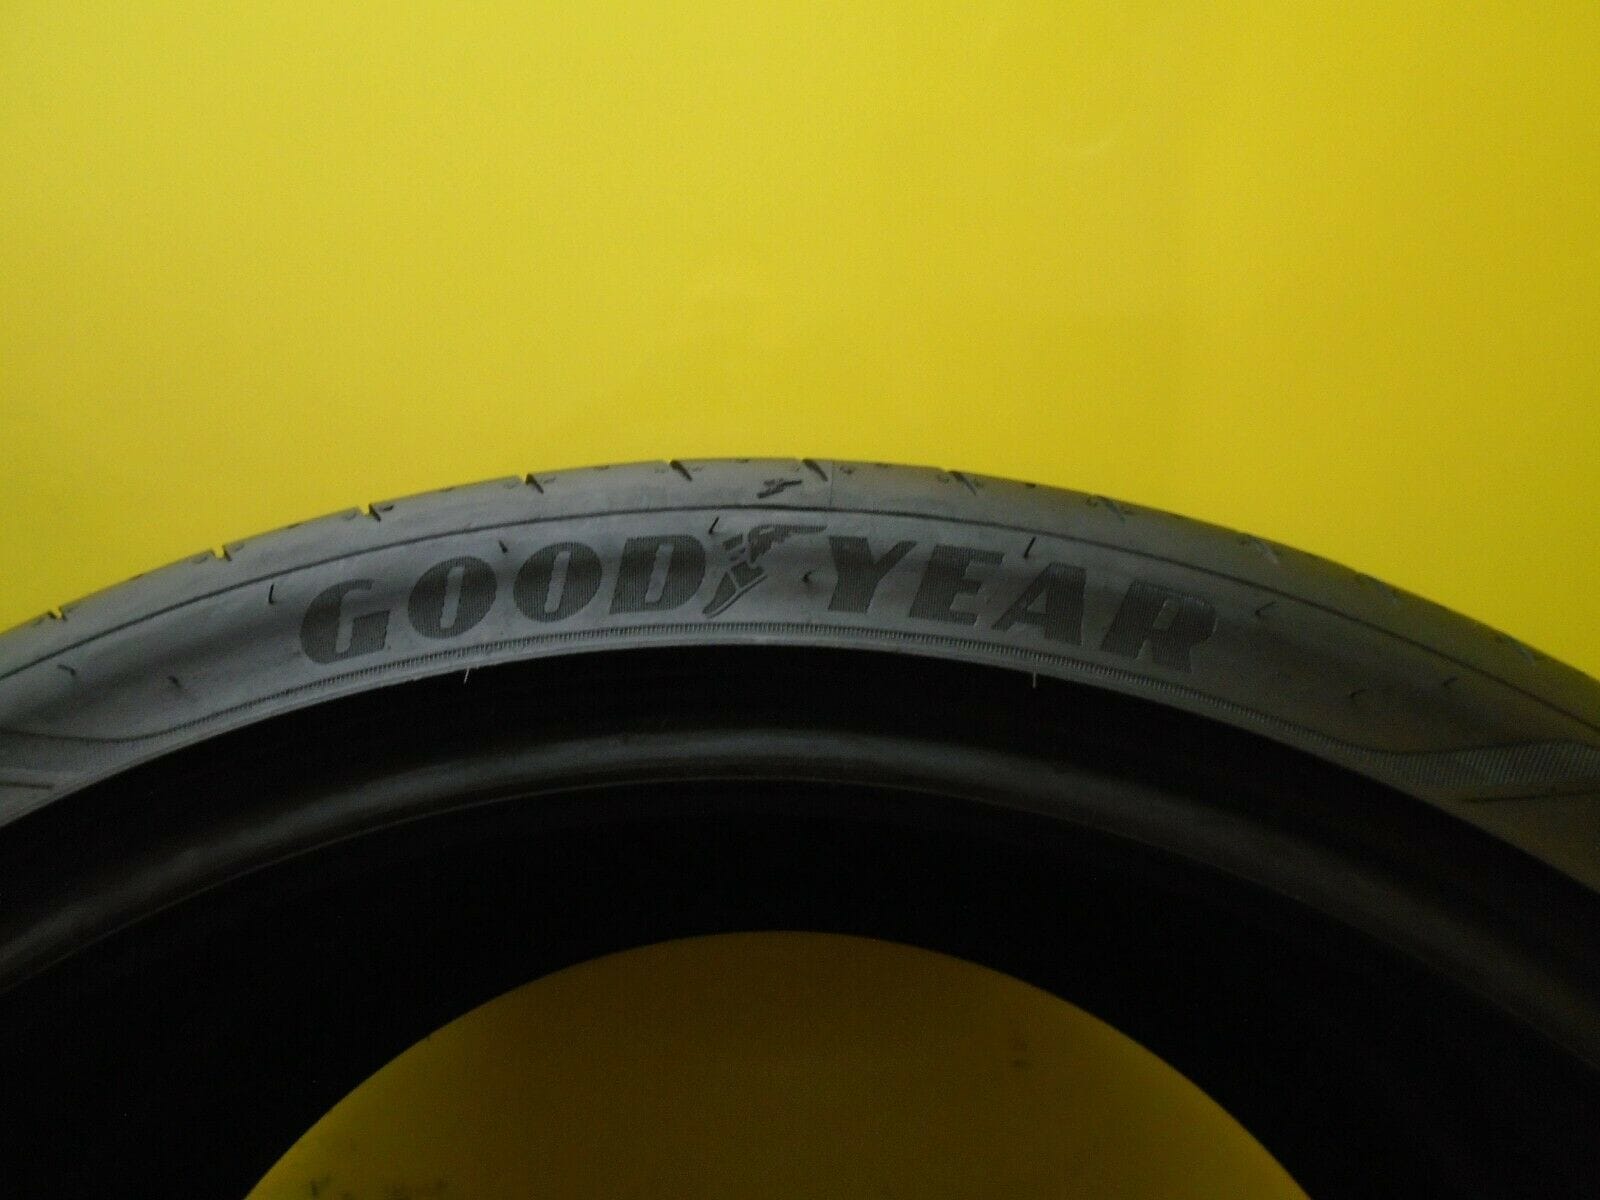 Wheels and Tires/Axles - 2 Great condition Goodyear Eagle F1 tires 305/20r21 70% tread - Used - 0  All Models - Clinton, NJ 08809, United States